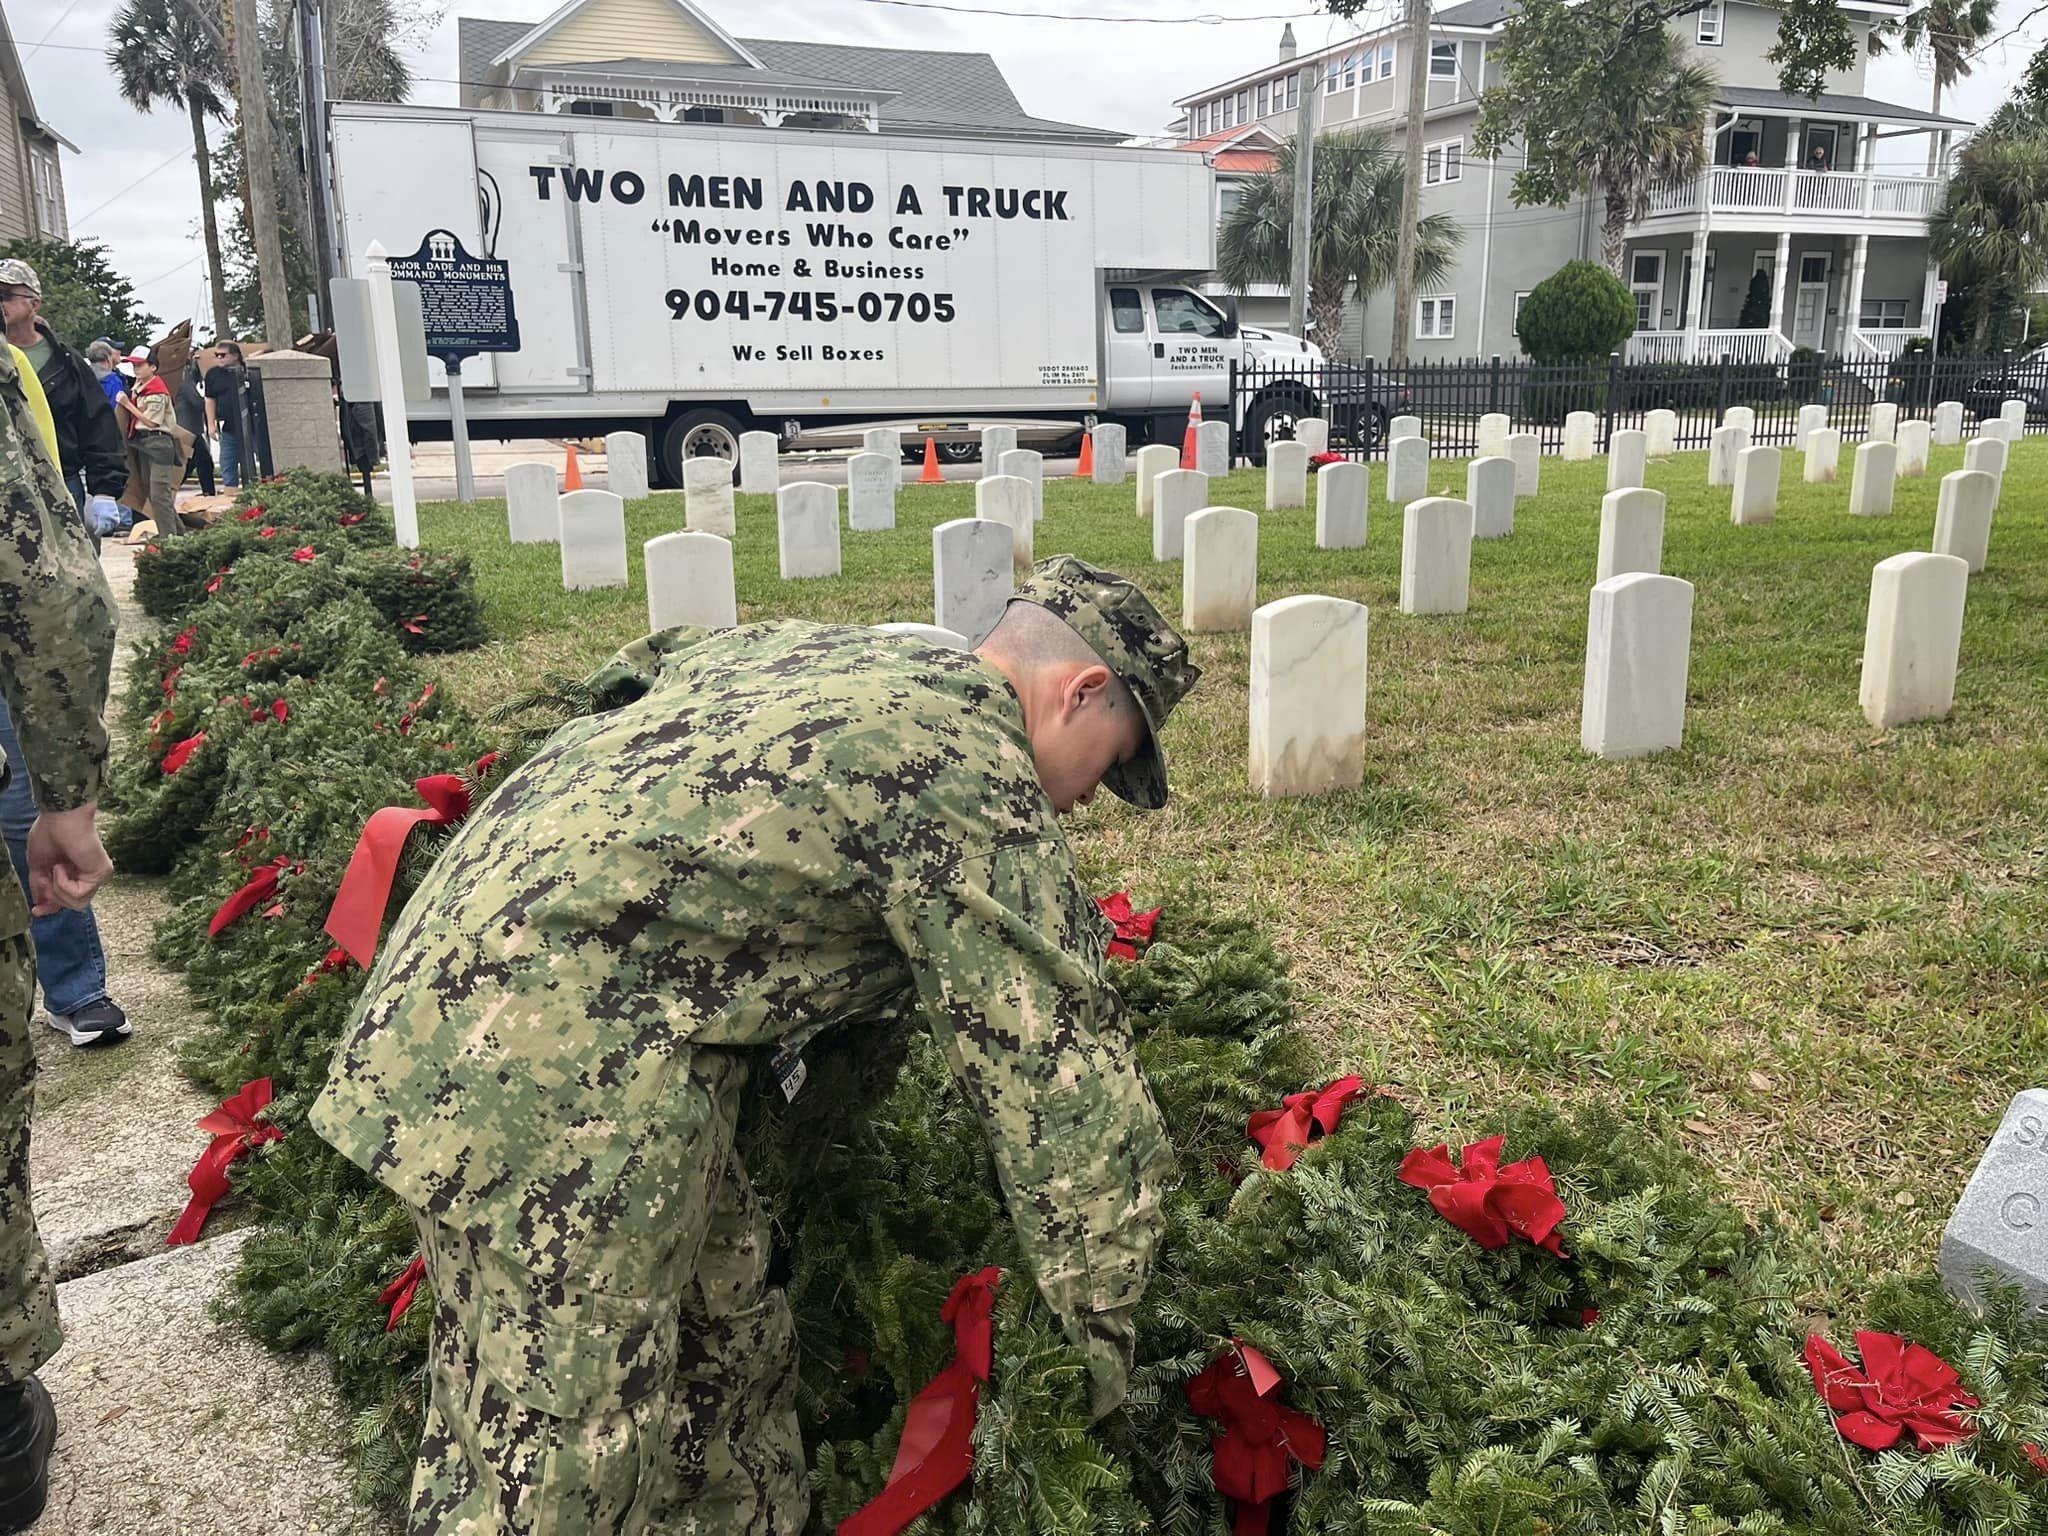 Two Men And A Truck delivers wreaths for Wreaths Across America